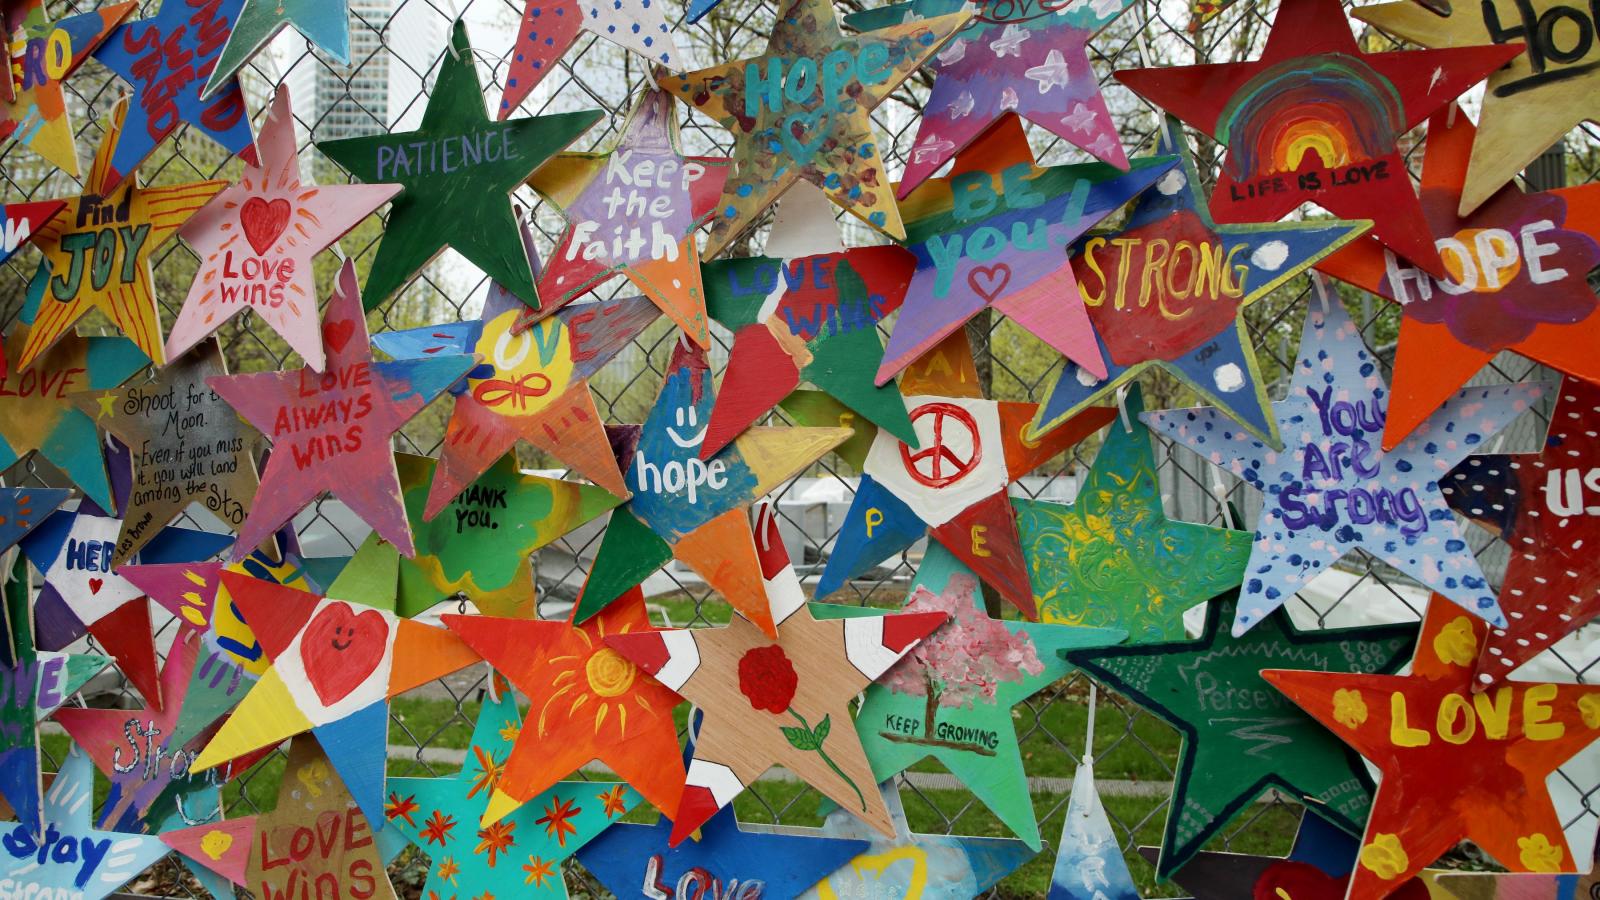 An array of hand-crafted Stars of Hope decorate a fence near the 9/11 Memorial plaza.  The stars bear messages such "Peace," "Keep the Faith," and "Love Wins."